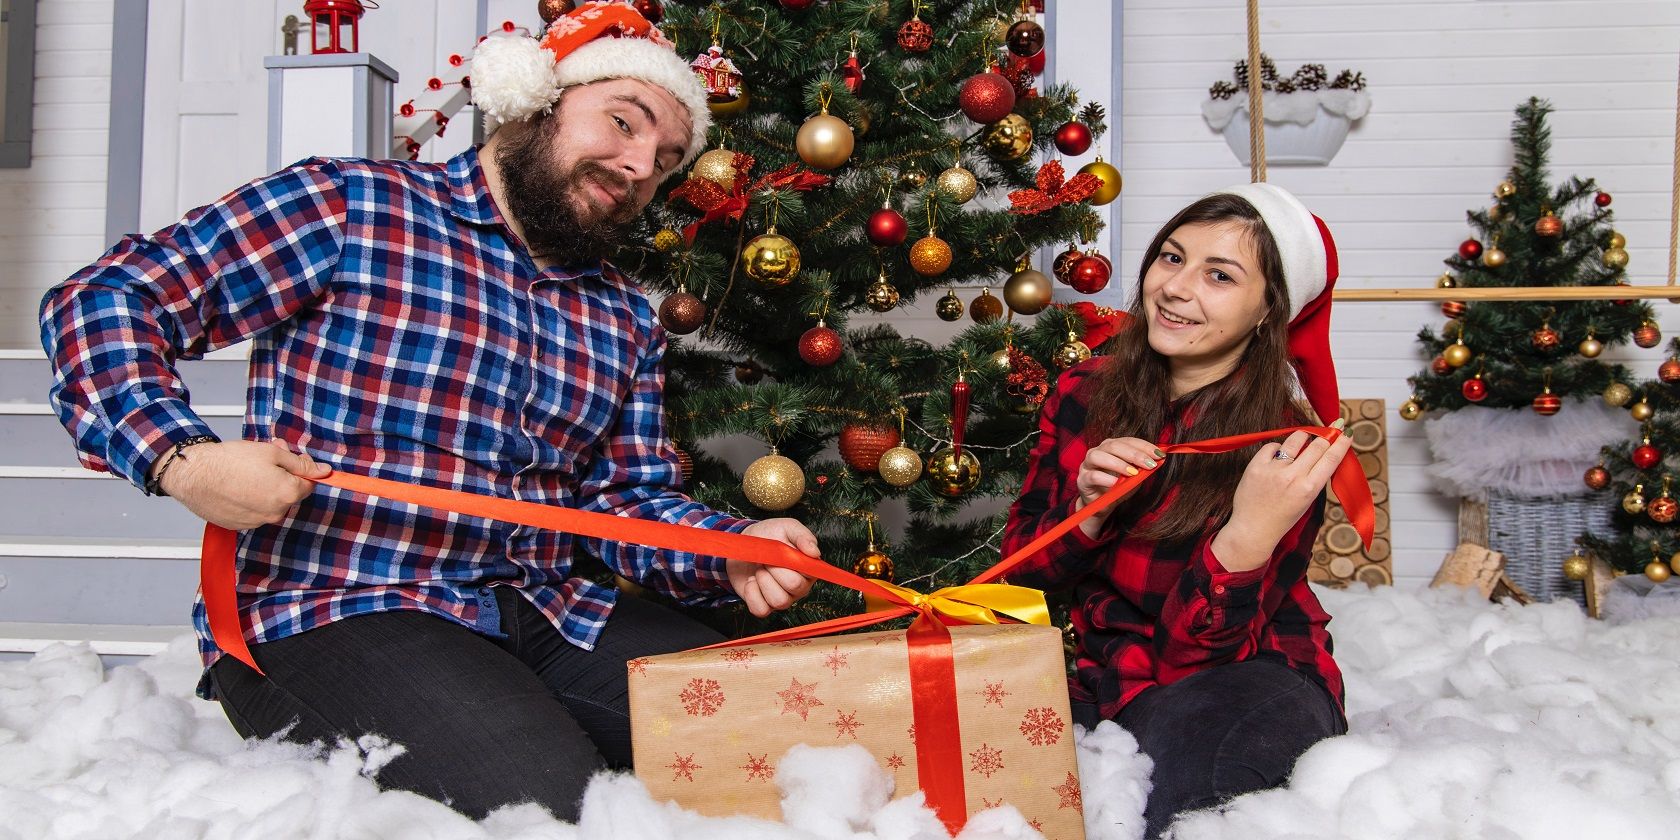 A couple in a Christmas decorated room unwrapping a gift